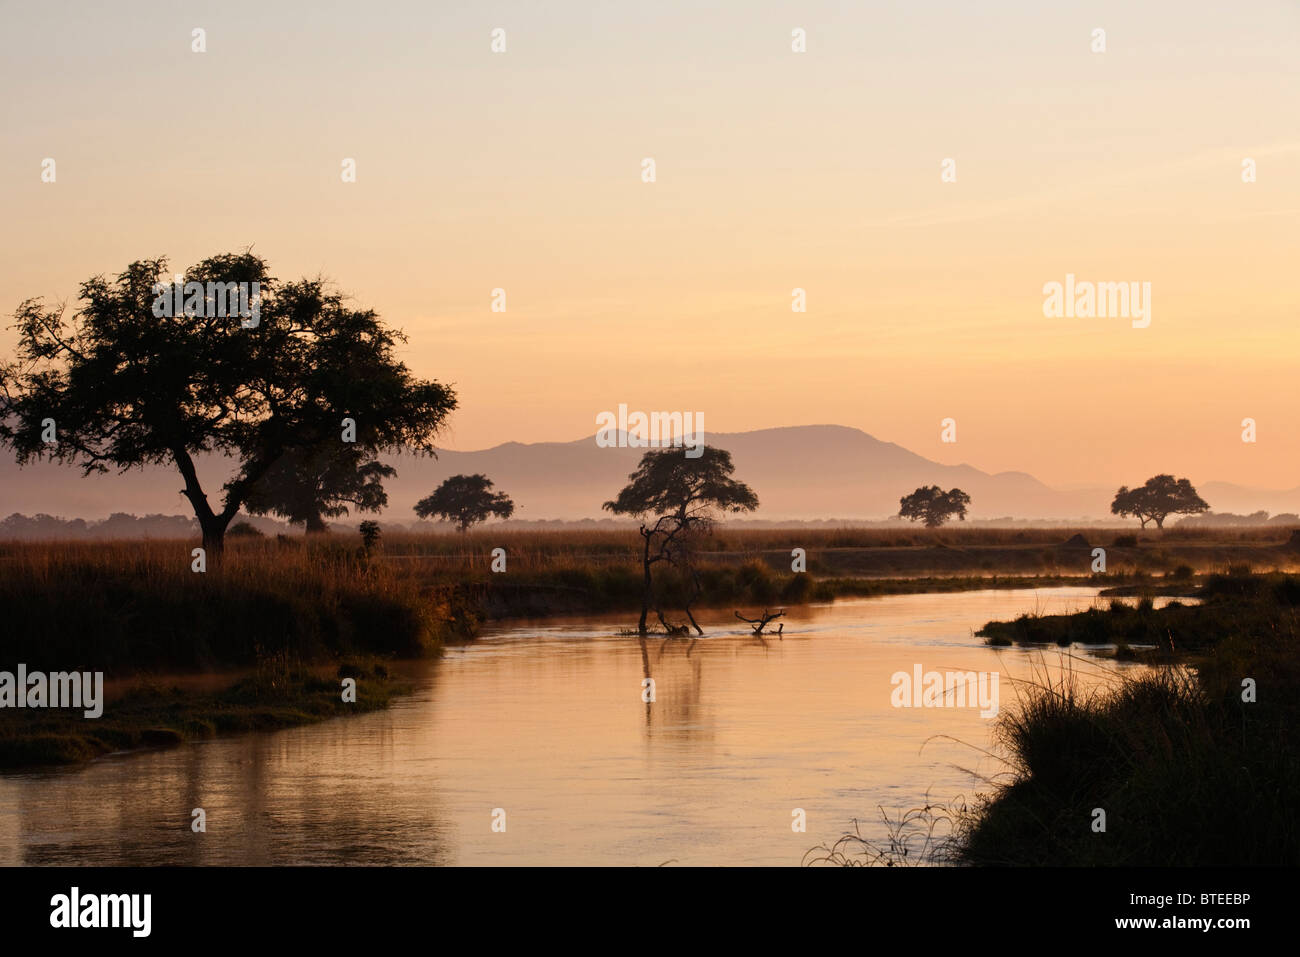 Sunset with Zambezi River in the foreground and the mountain and trees in the background Stock Photo